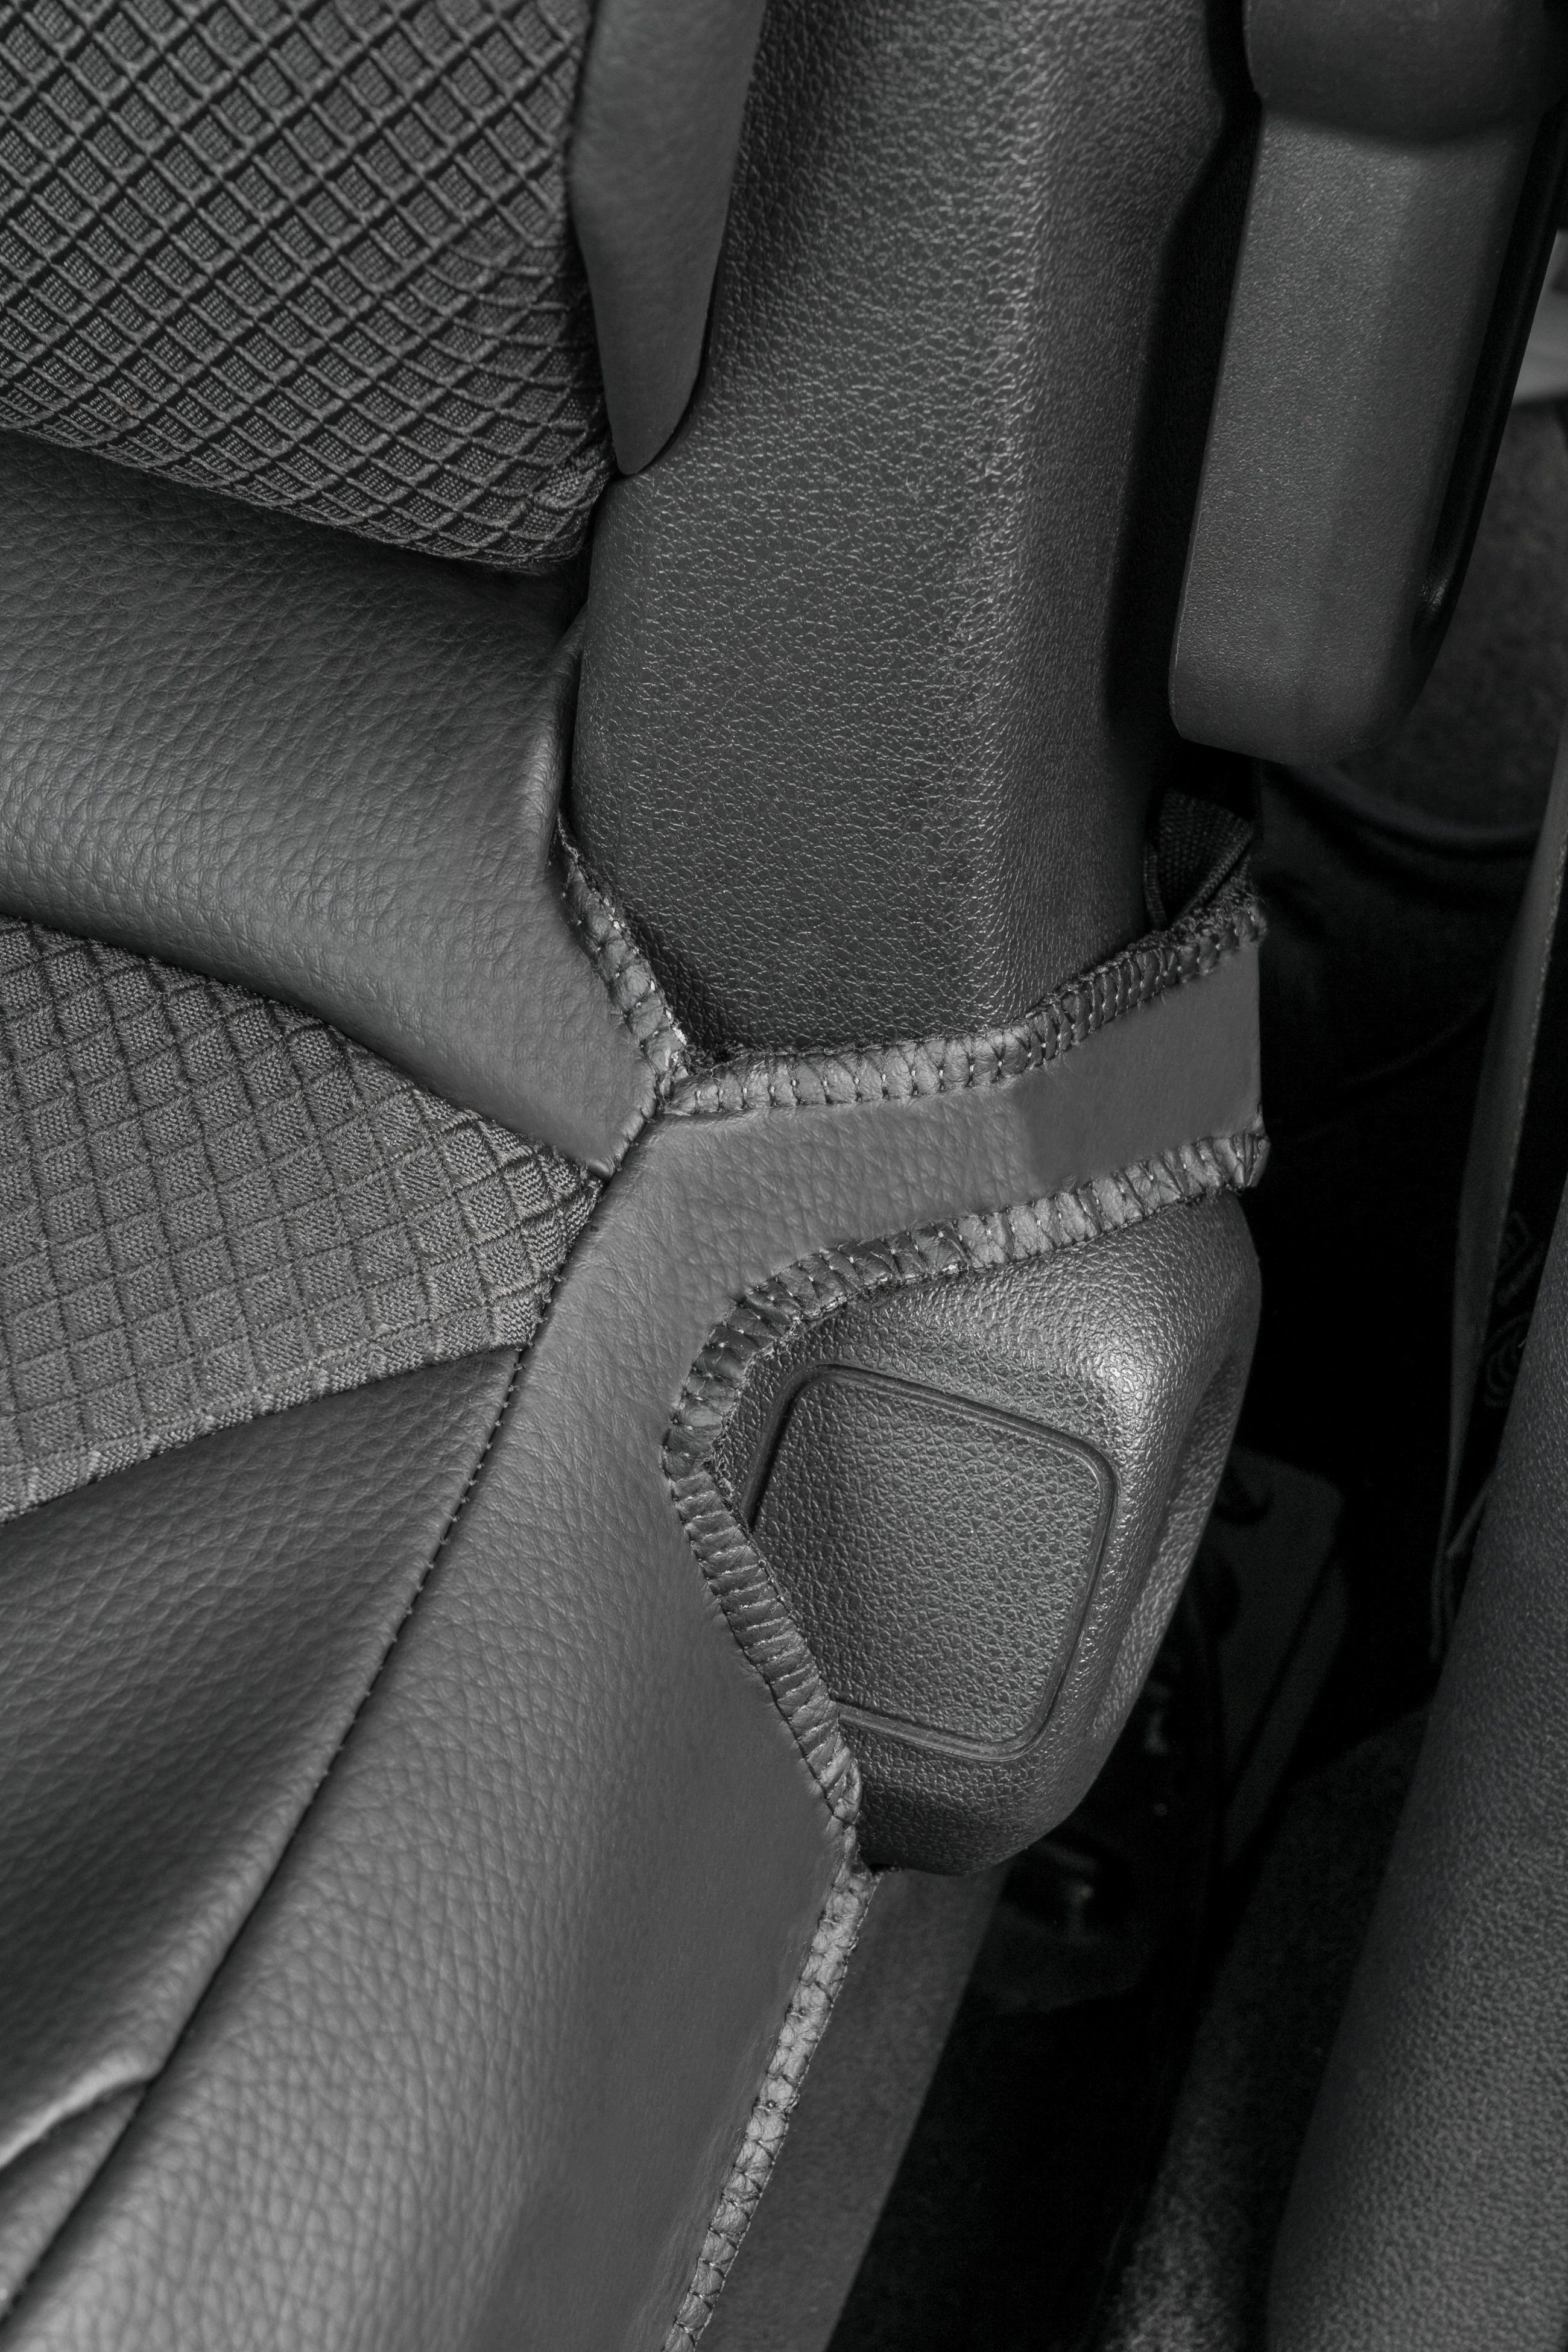 Premium Seat Cover for Citroen Berlingo 2 2009-Today, 2 single seat covers front